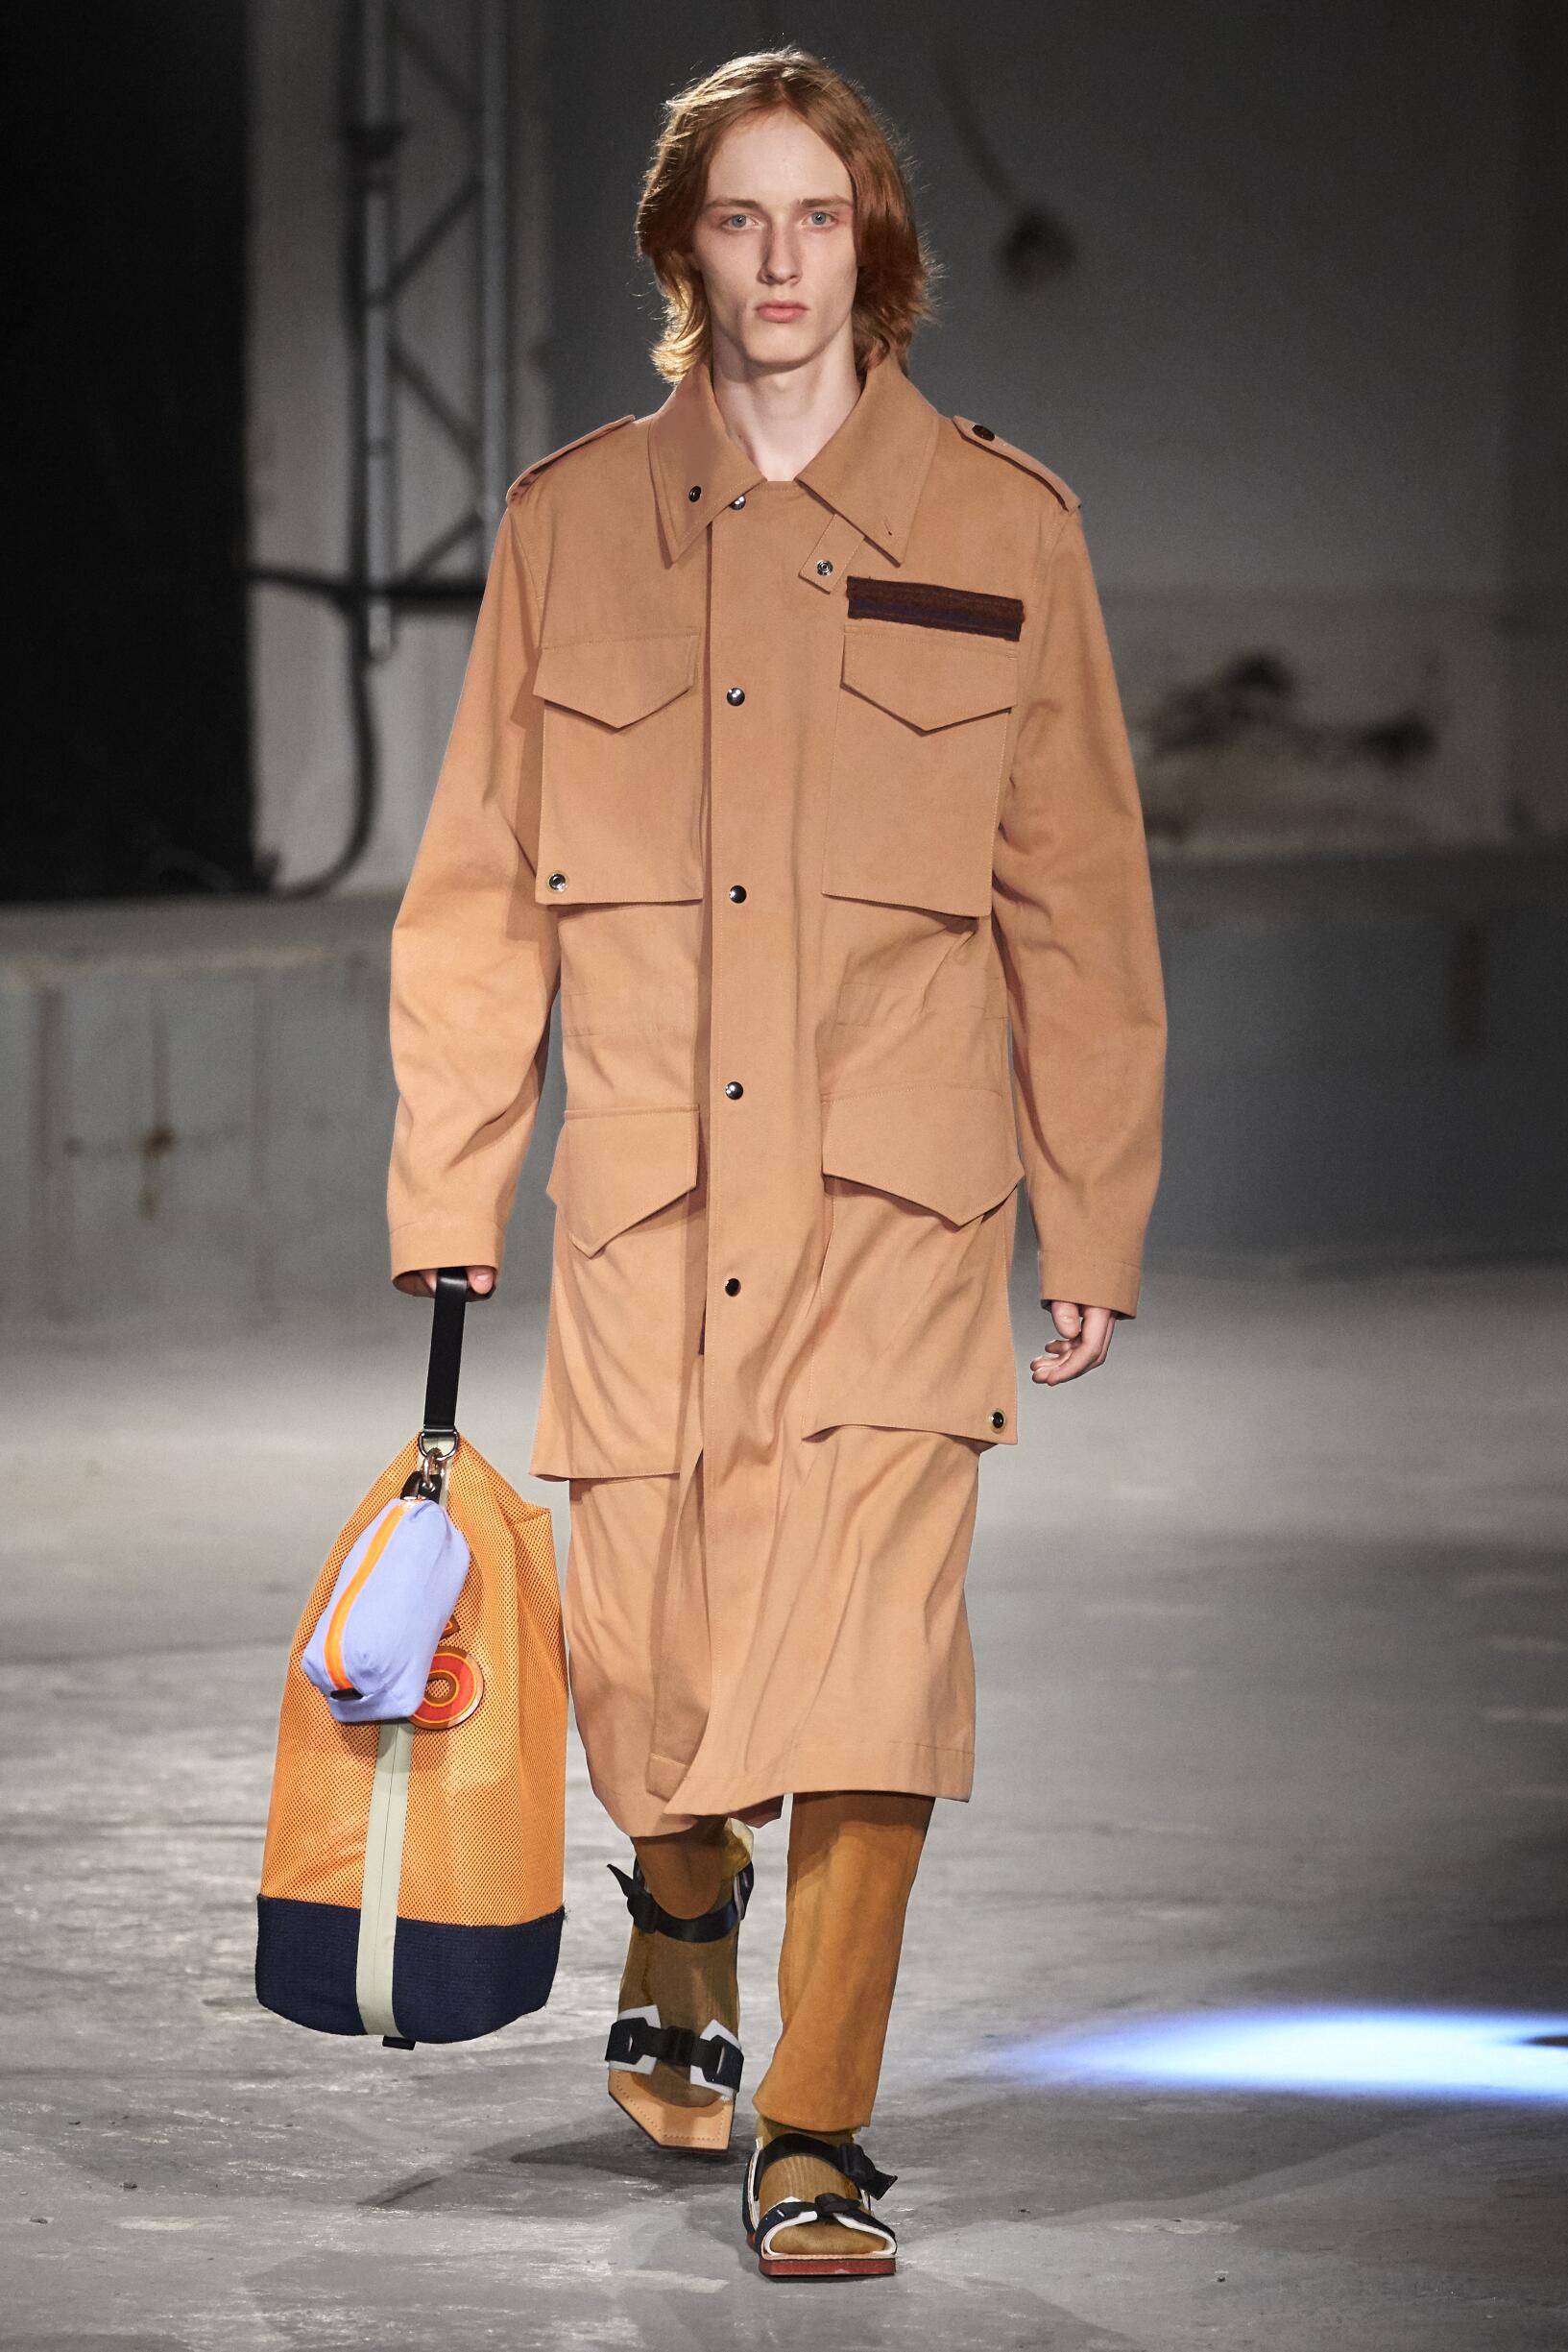 ACNE STUDIOS SPRING SUMMER 2019 MEN'S COLLECTION | The Skinny Beep